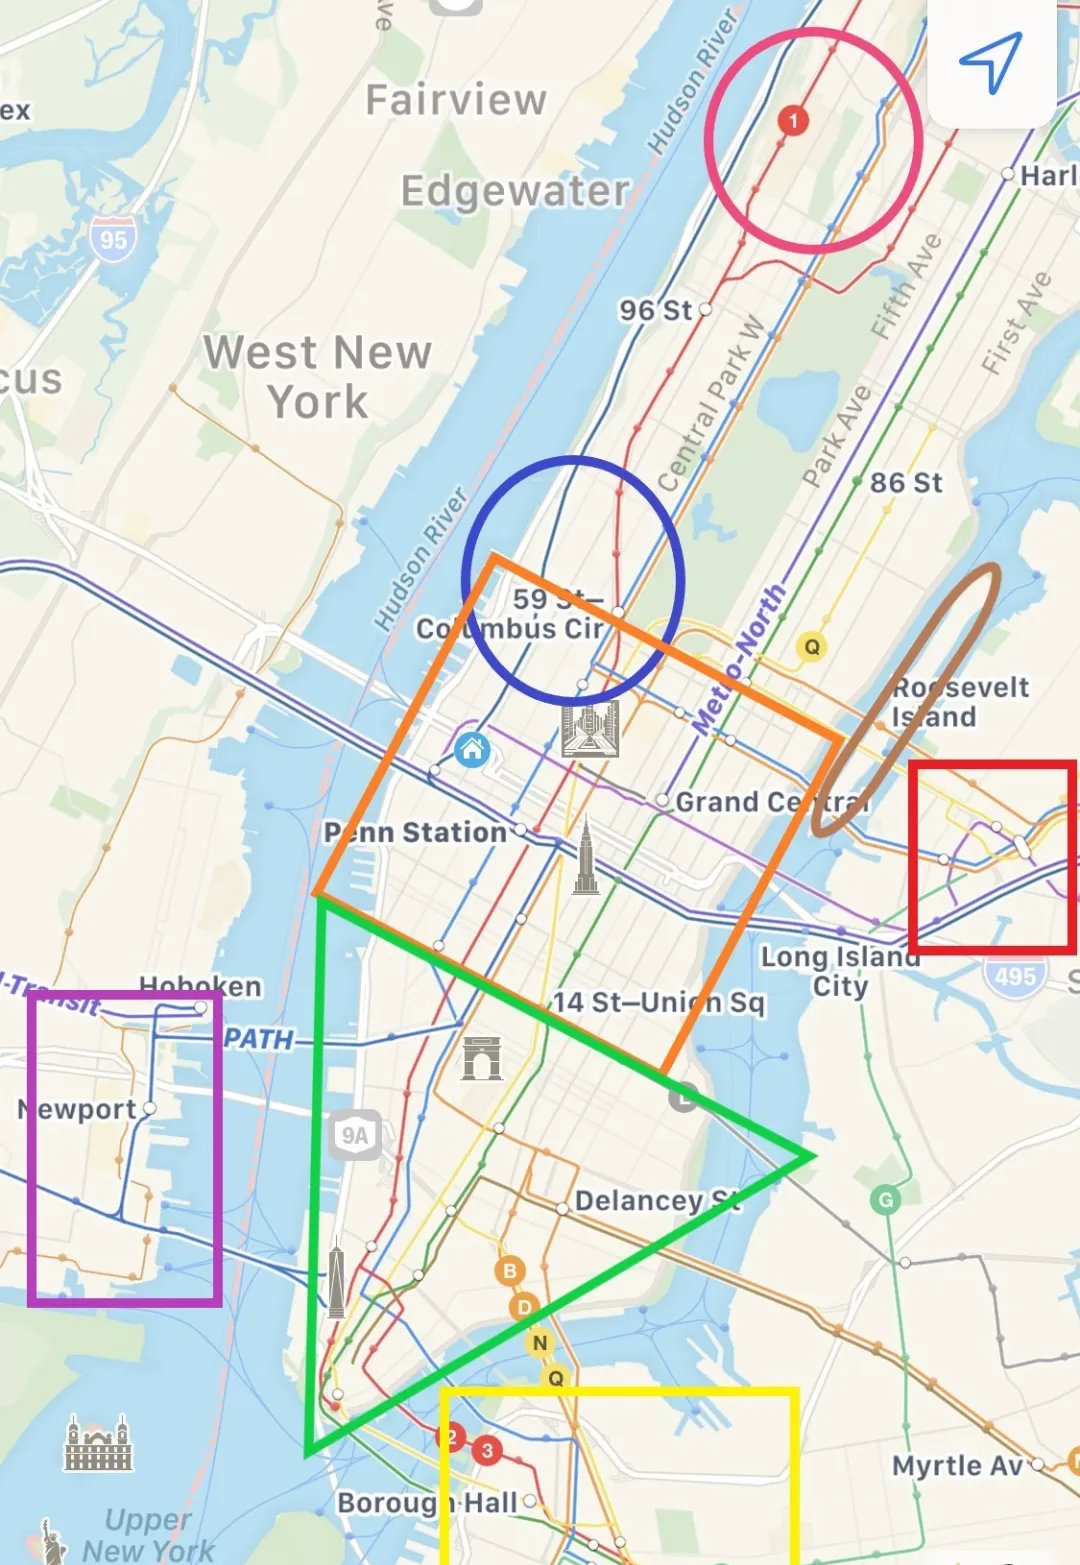 This image shows a section of a map, likely from a mobile mapping application, featuring parts of New York City. The map is overlaid with various colored lines and shapes, possibly indicating different routes or areas of interest. Notable landmarks such as Penn Station, Columbus Circle, and the Hudson River are labeled. The map also includes representations of streets, subway lines, and icons for specific locations like a courthouse and a library. There are colored geometric shapes drawn on the map, such as circles and rectangles, which do not correspond to standard map symbols and may have been added by a user for specific purposes.